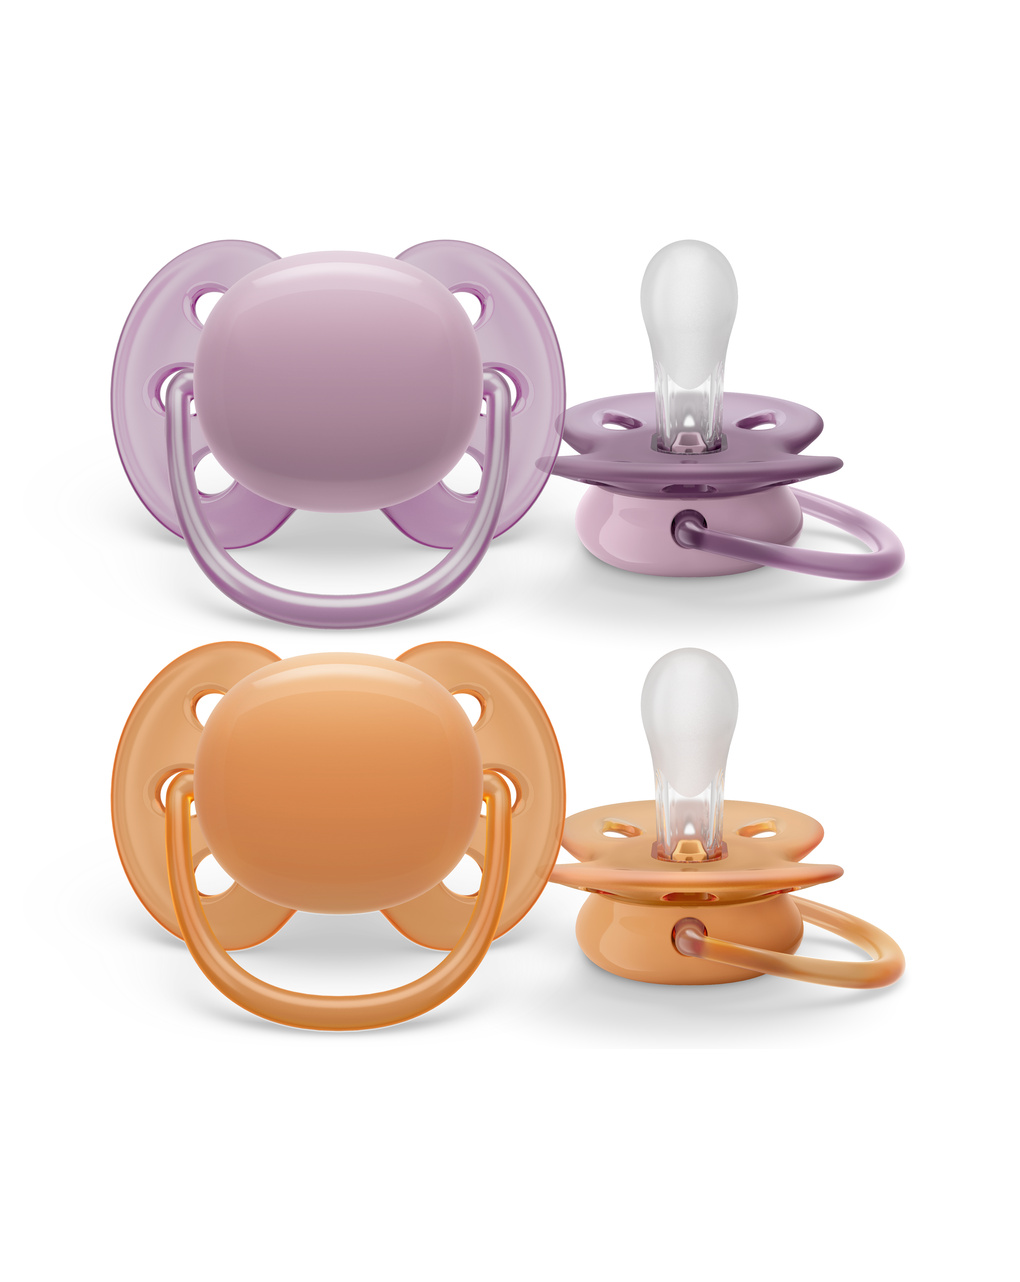 TOUS BABY - Set 2 chupetes y portachupetes Baby TOUS. Chupetes